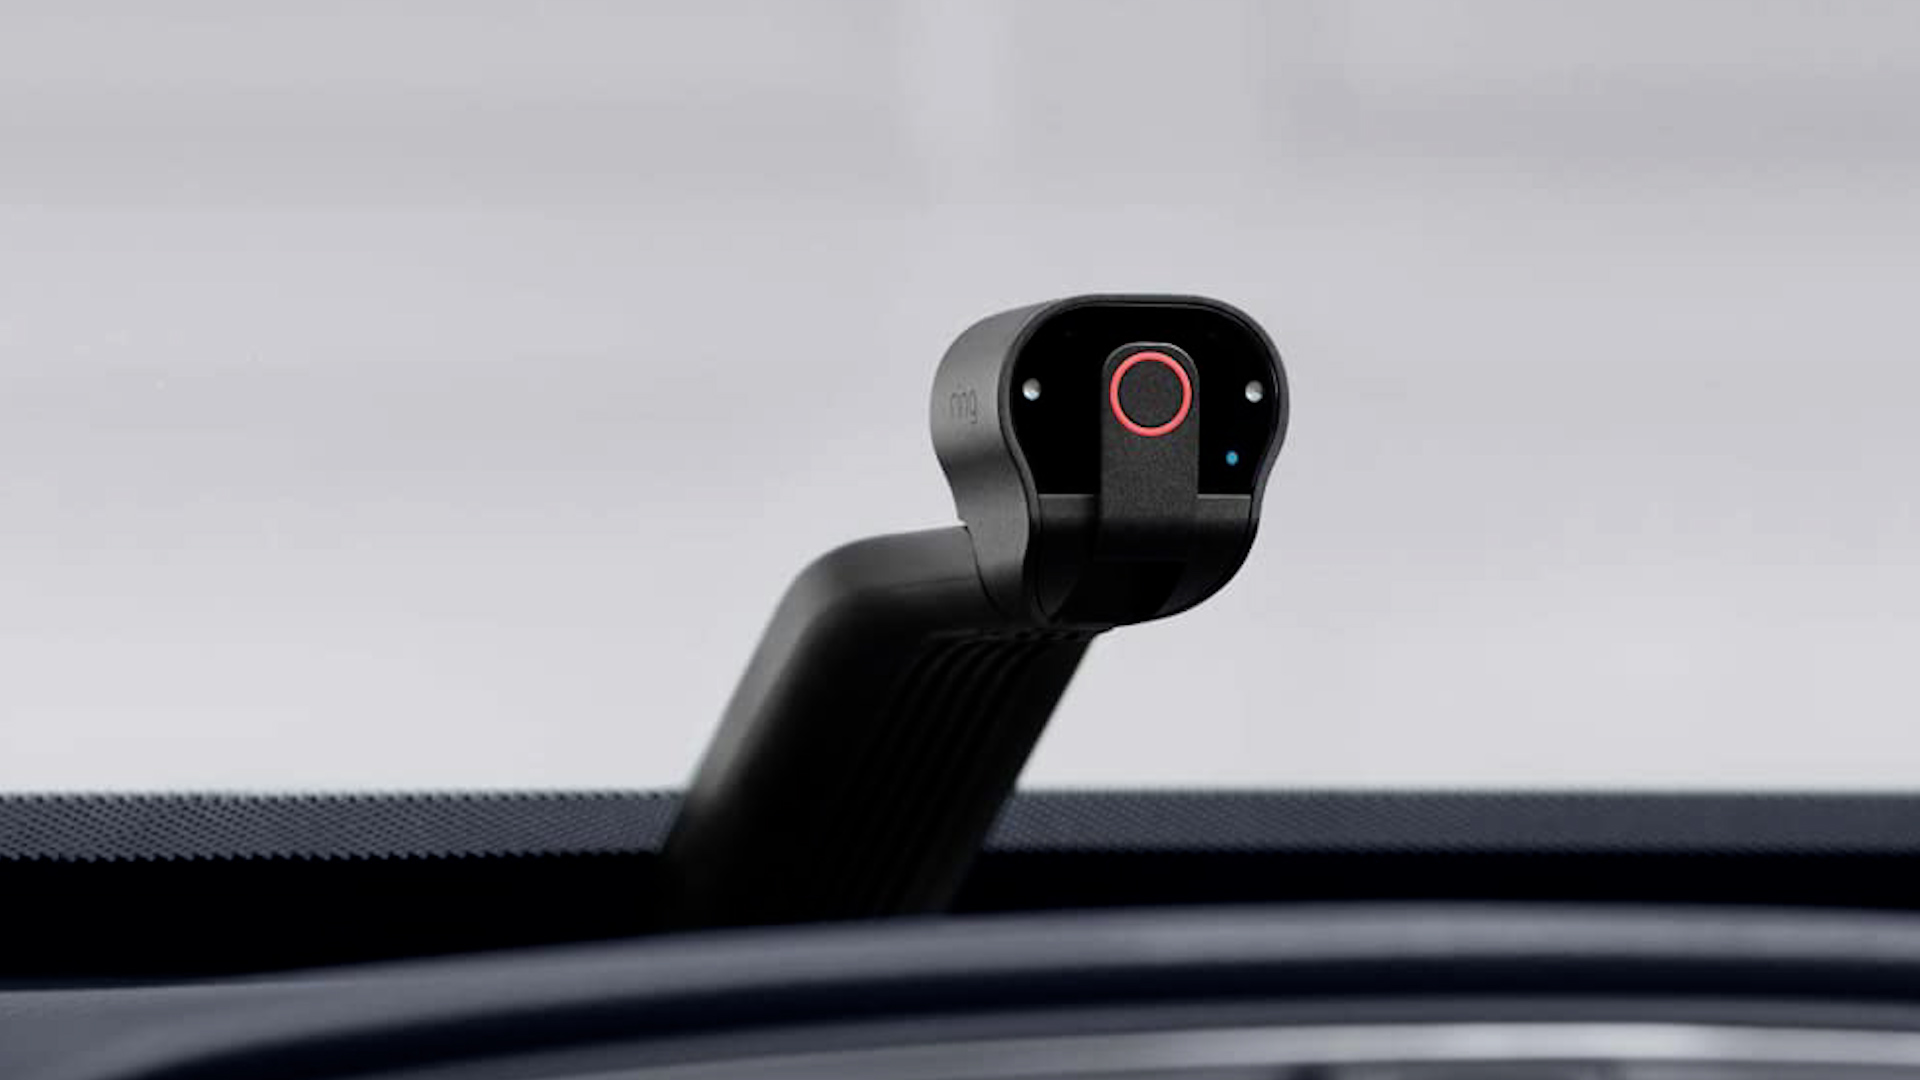 s Ring Car Cam Is Finally Here! Get Yours Today